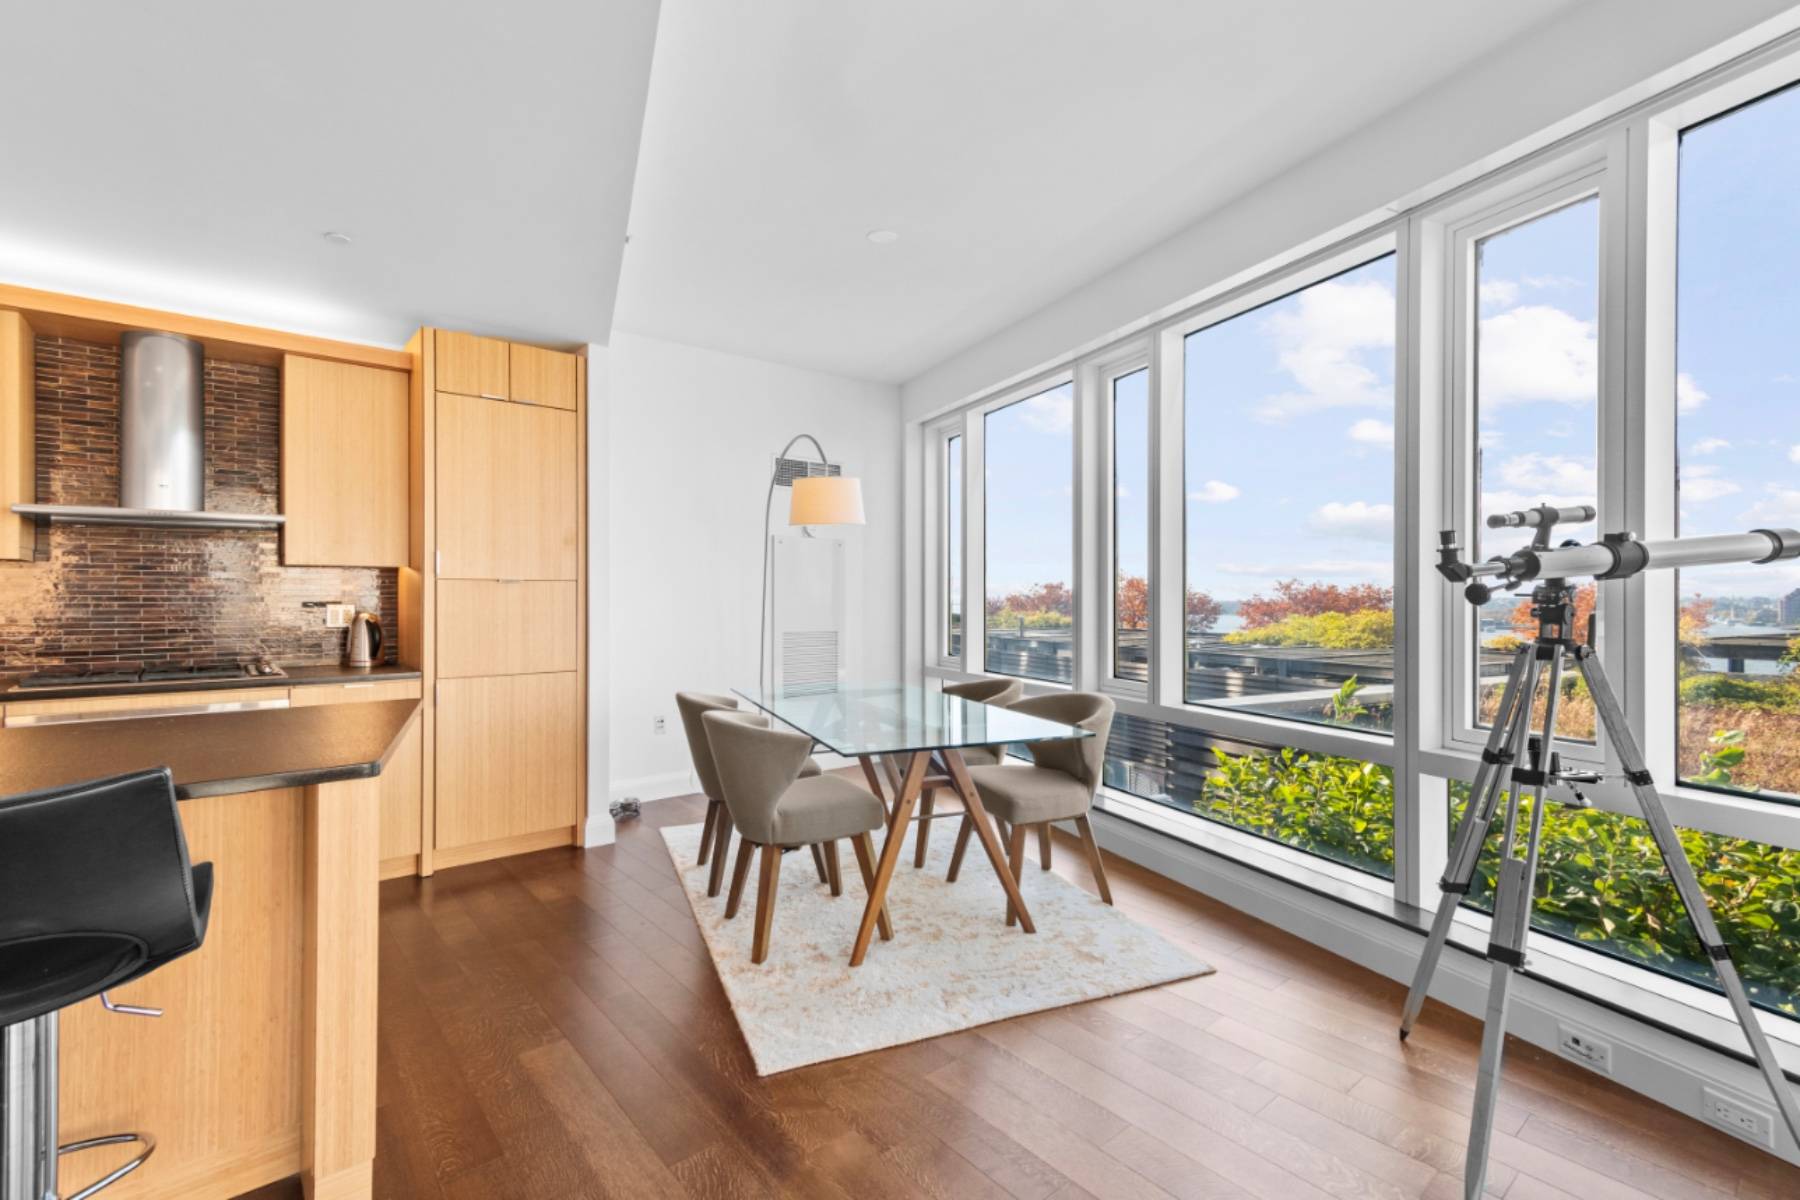 Indulge in the breathtaking Hudson River views from this expansive corner two bedroom residence at the acclaimed Visionaire Condominium.